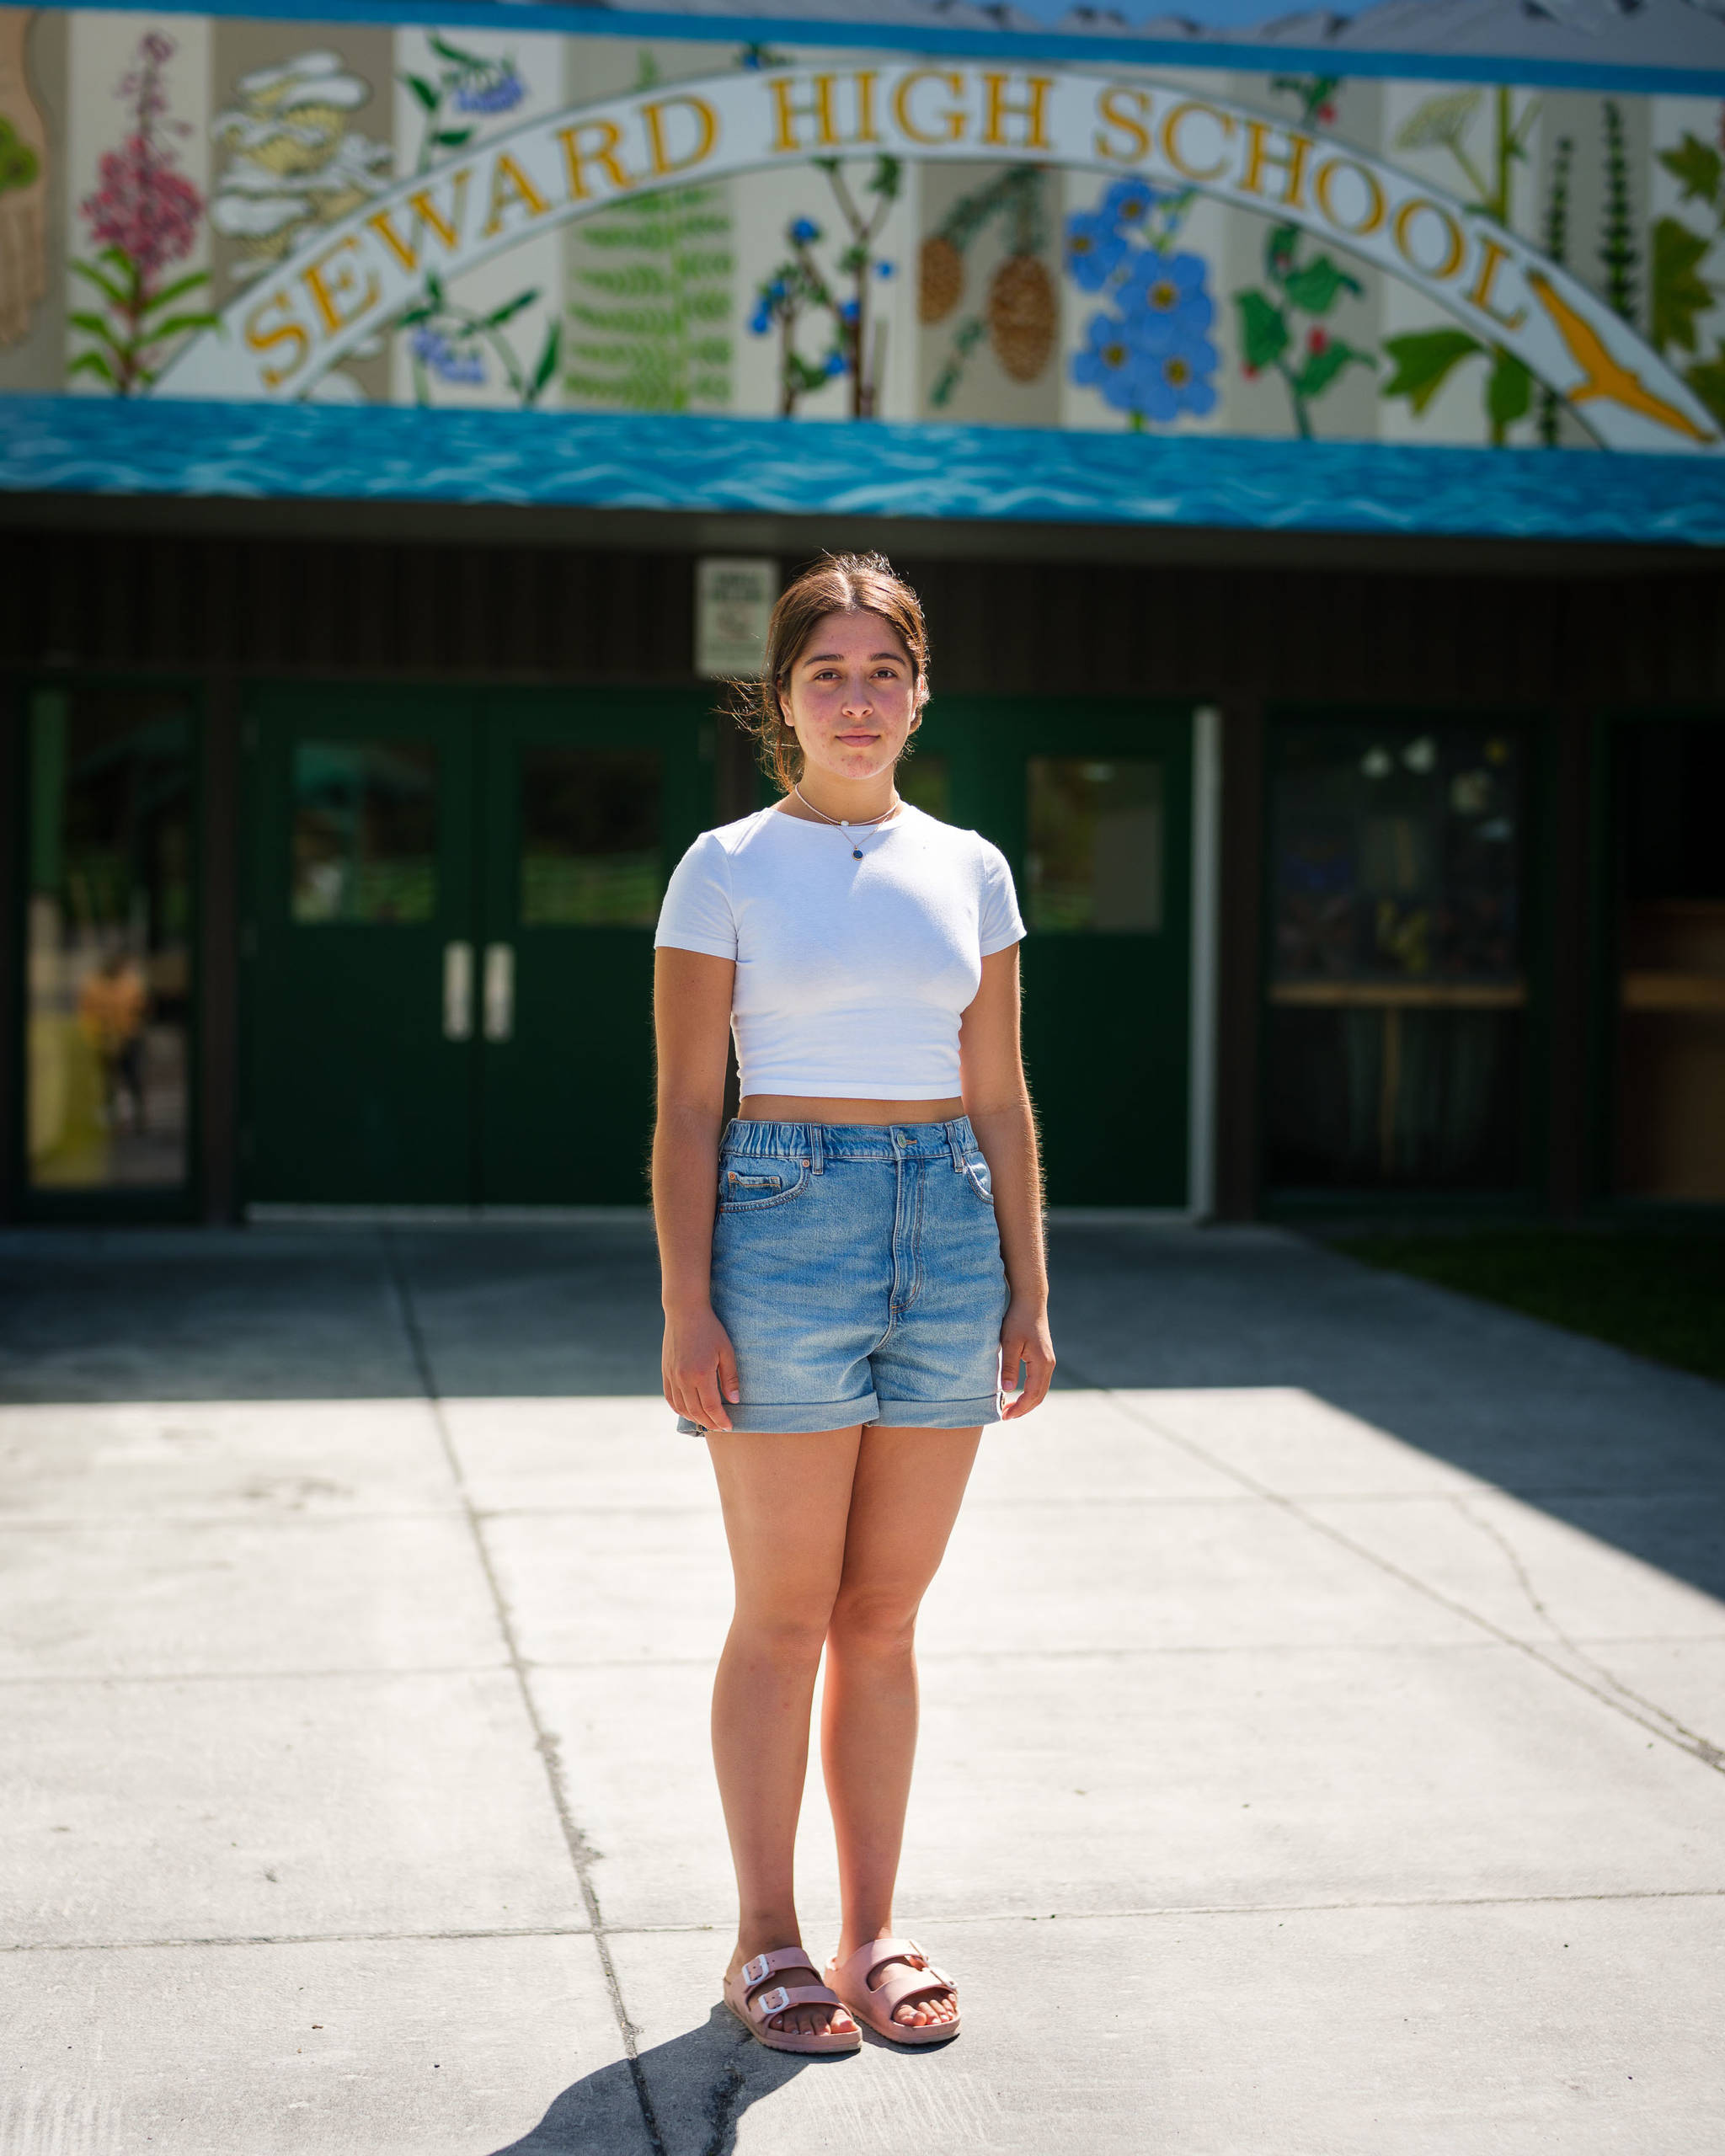 Selma Casagranda, a recent Seward High School graduate and lifelong resident of Seward, stands in front of her former school on May 25, 2021. (Young Kim for The Hechinger Report)